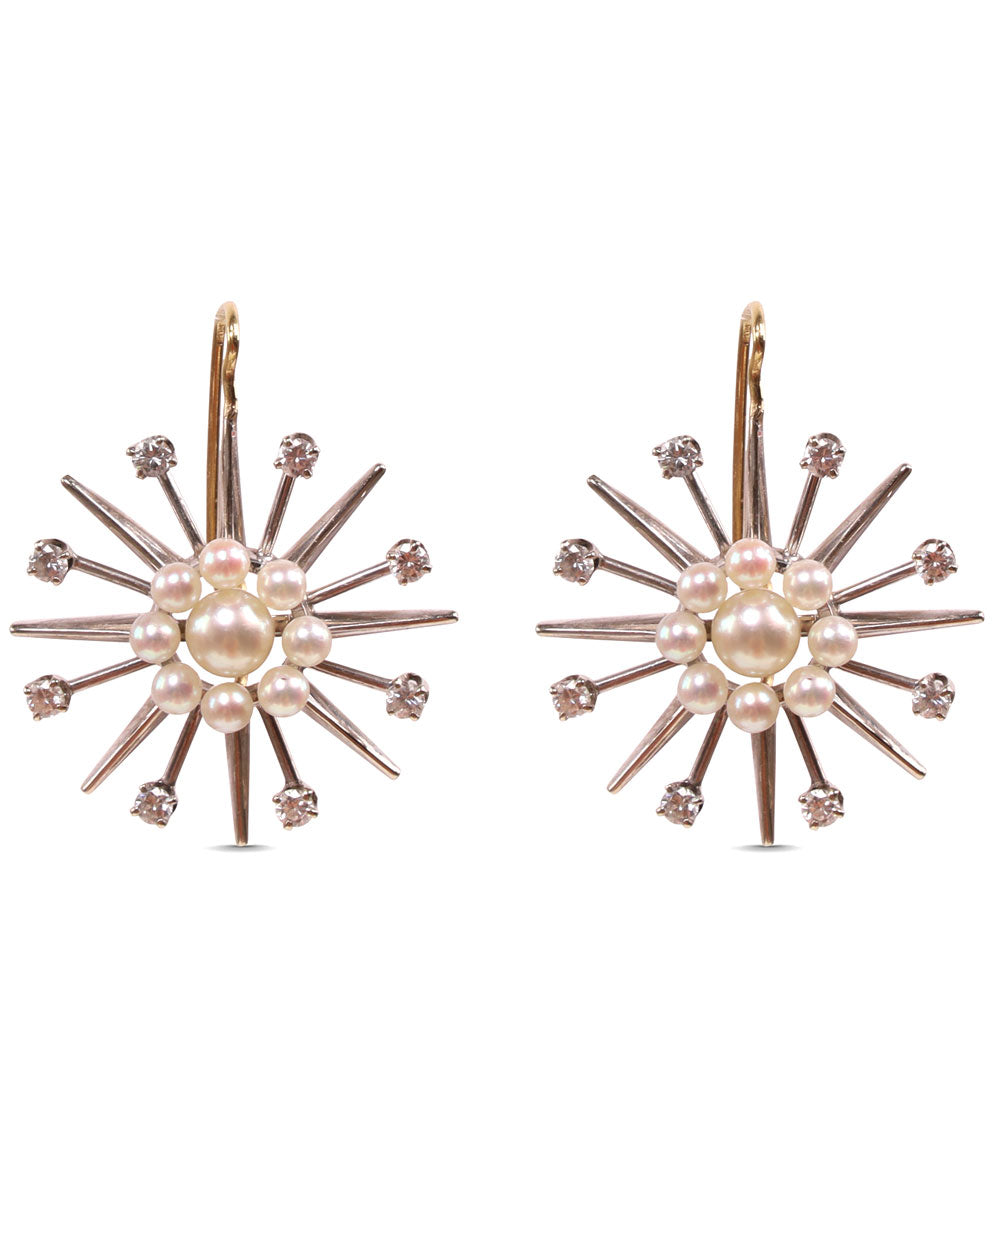 Antique Diamond and Pearl Starburst Earrings